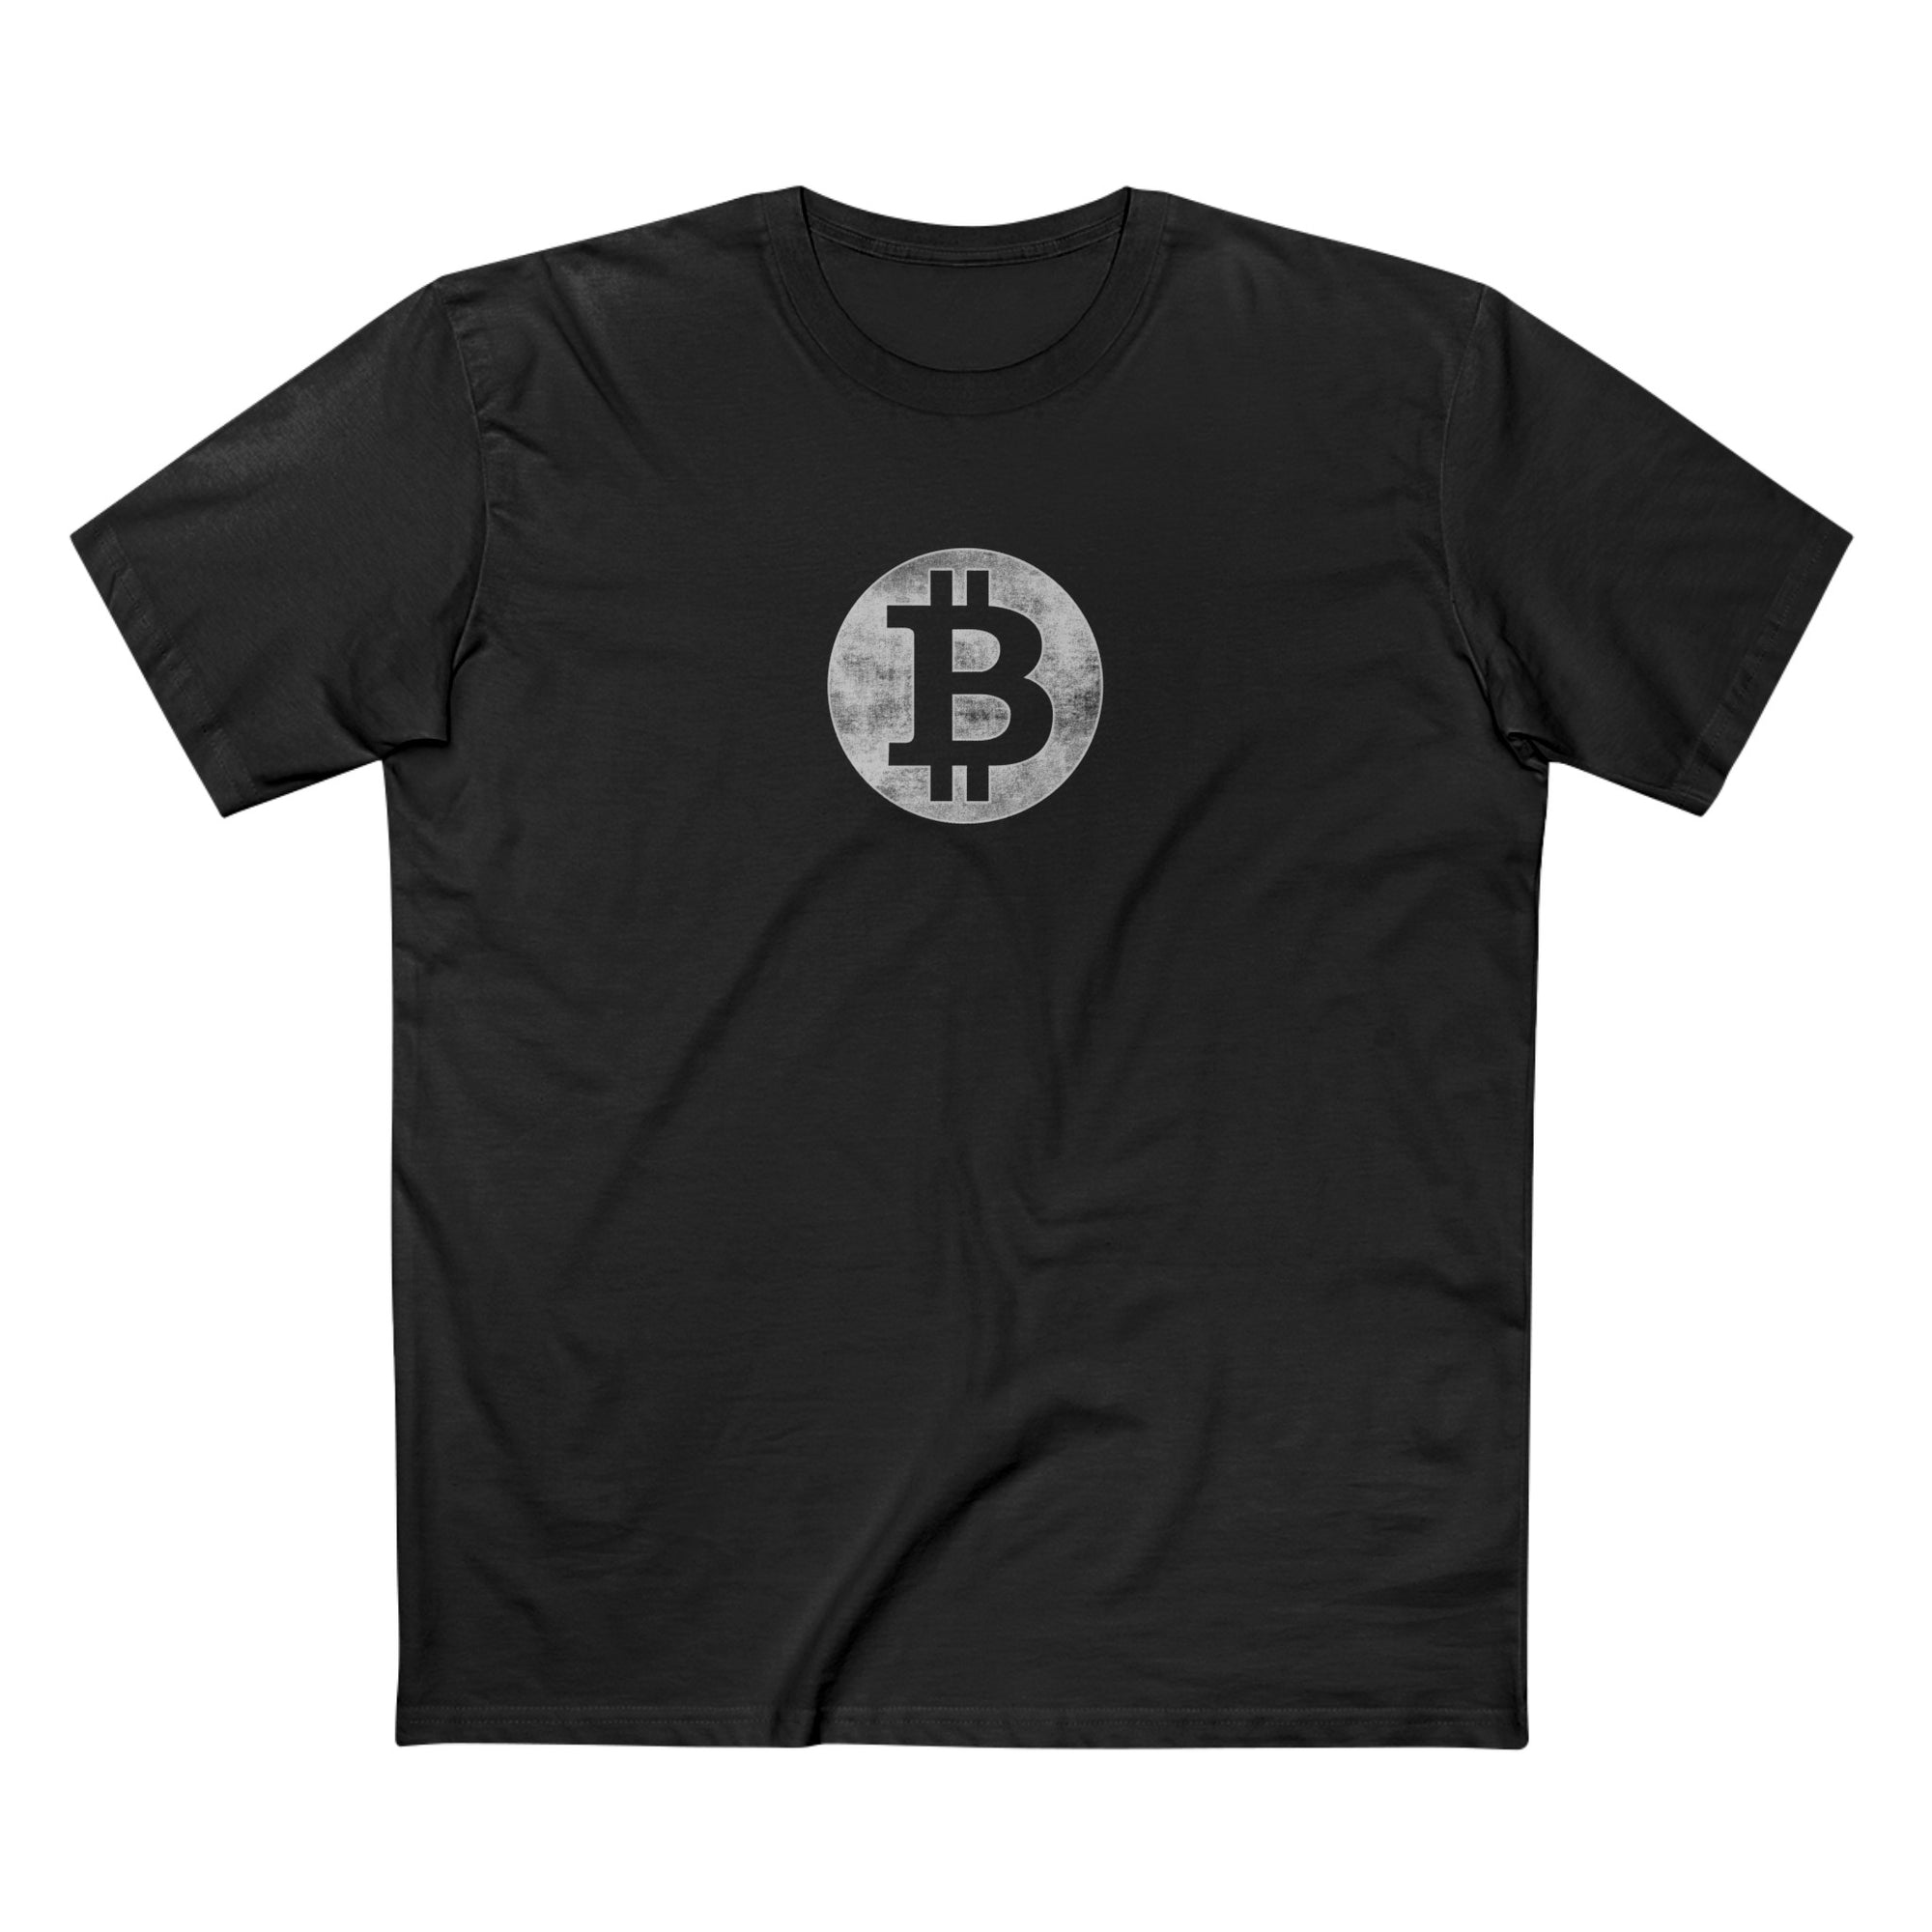 Bitcoin Moon Shirt front view. Available at NEONCRYPTO STORE.